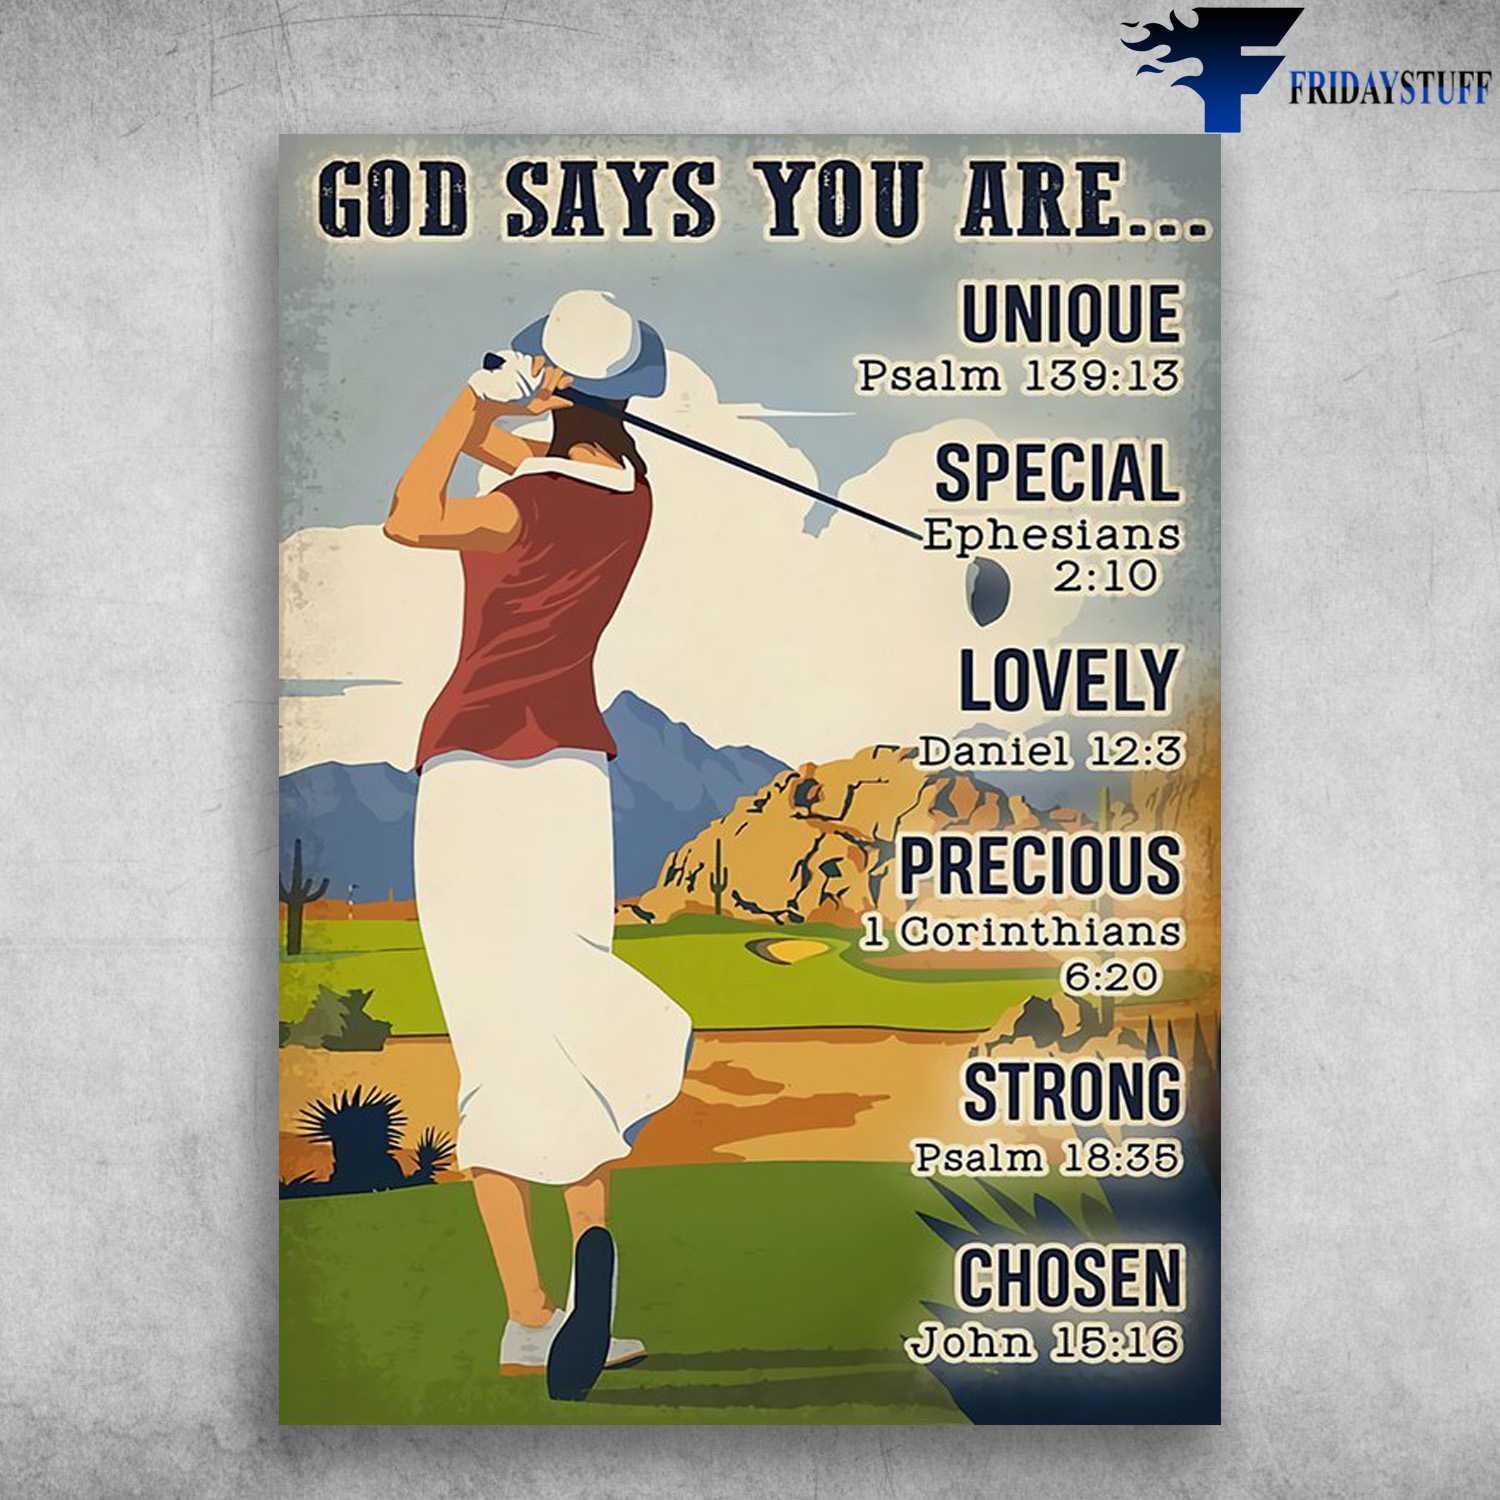 Golf Lady - God Says You Are Unique, Special, Lovely, Precious, Strong, Chosen